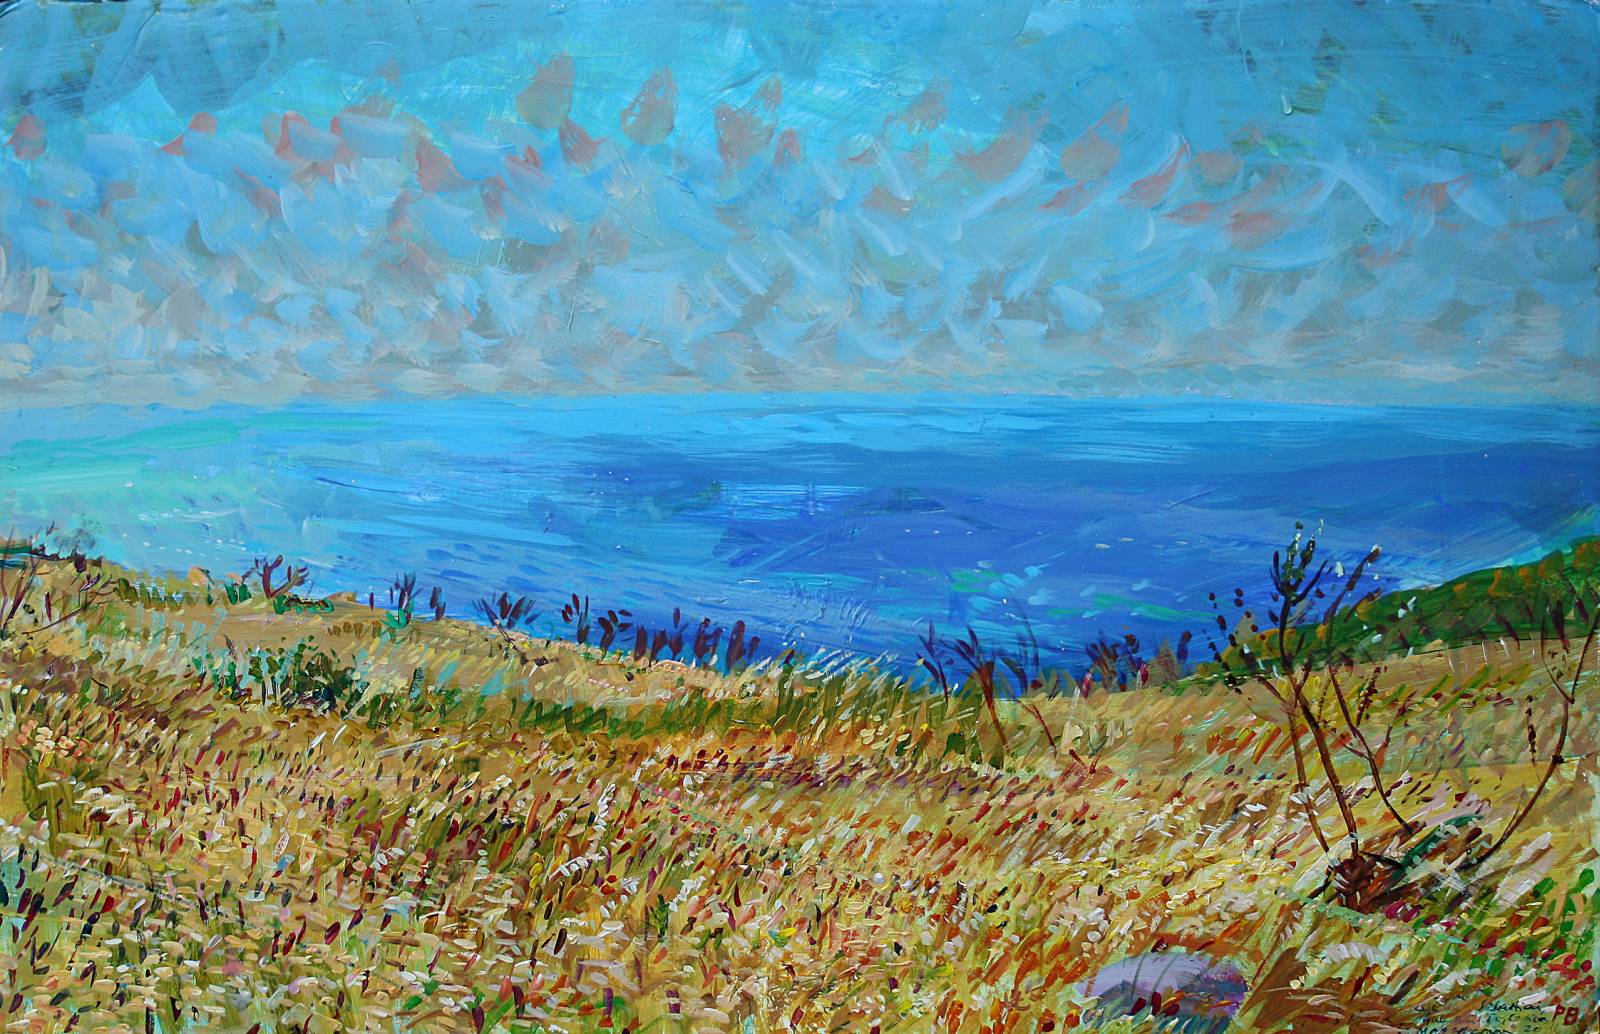 ‘THE MED OFF THE WEST COAST OF CORSICA - WITH ANCIENT WHEATFIELD IN FOREGROUND‘